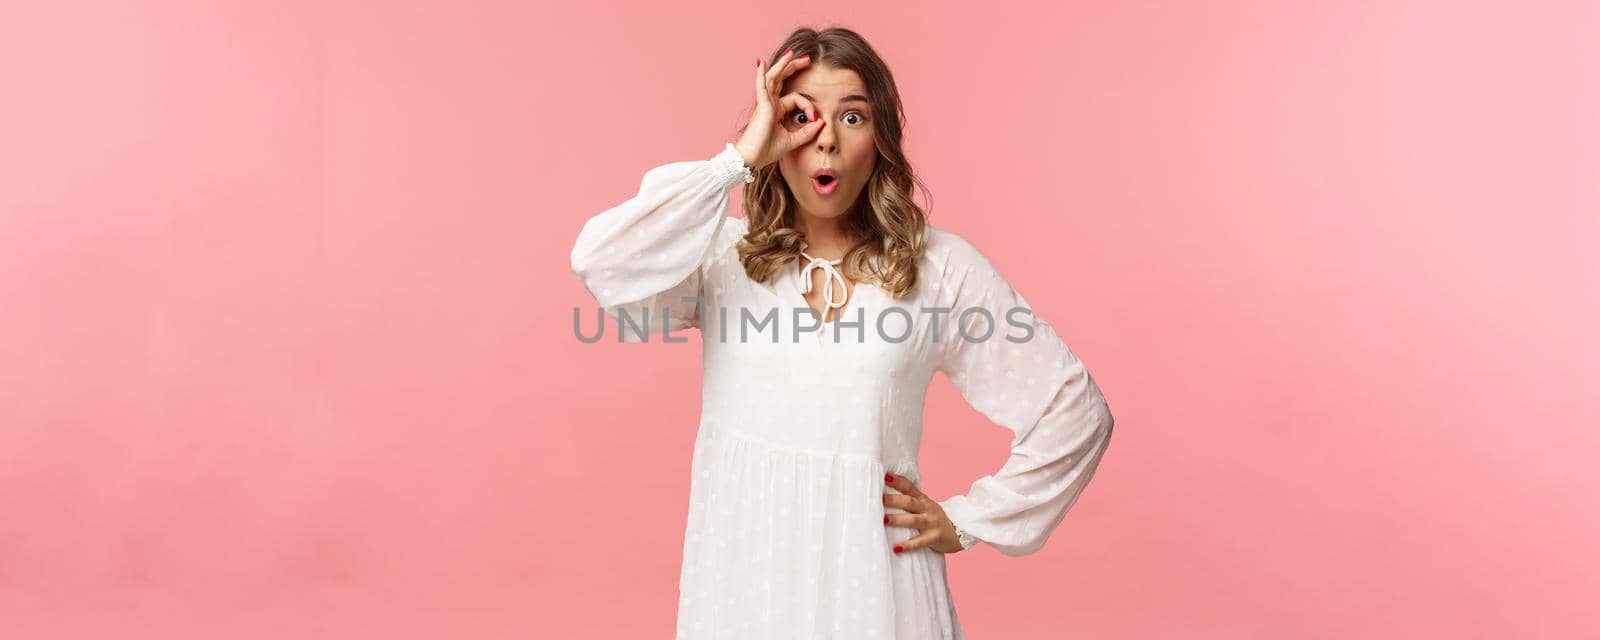 Portrait of amazed and intrigued young blond girl seeing something awesome, look from okay sign with startled excited expression, fold lips say wow, pop eyes at camera, pink background.